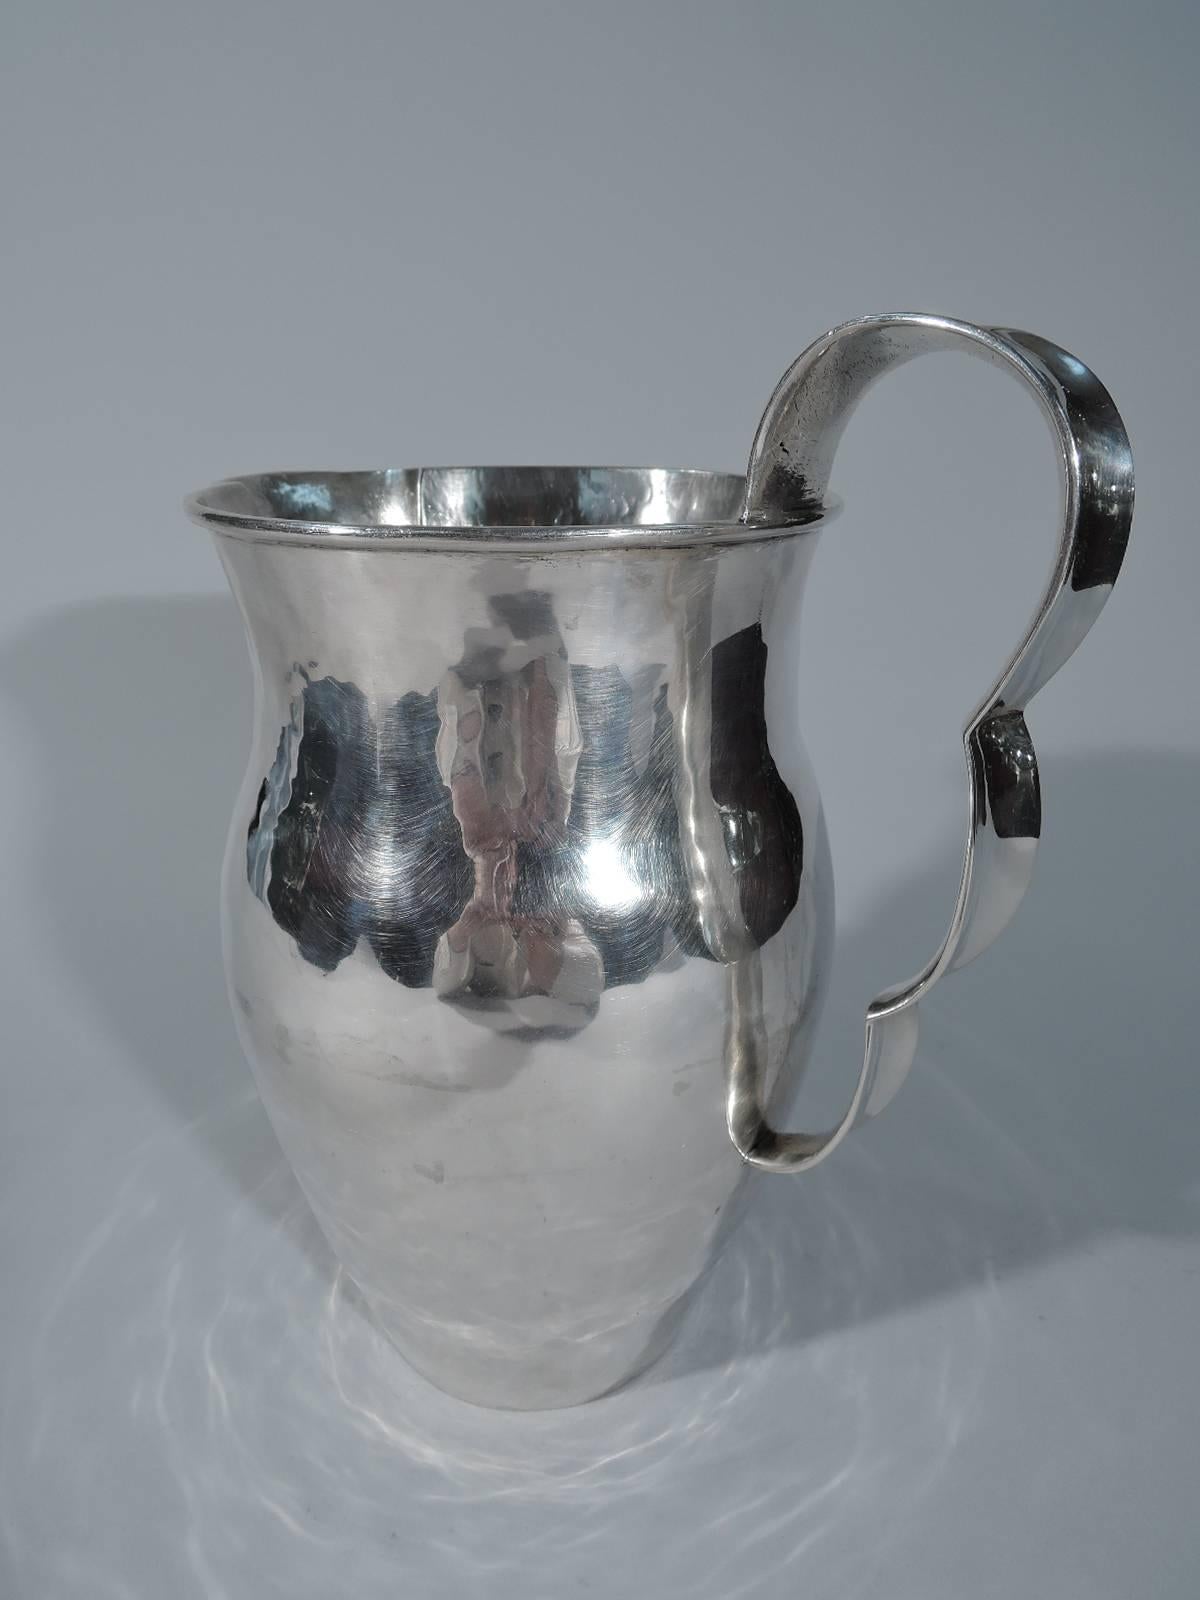 Modern sterling silver water pitcher. Made by Spratling in Mexico. Elongated baluster body with high-looping ribbon handle. Bell-form spout terminating in bead. Visible hand hammering. A great piece by this maker. Hallmarked (ca 1940-44). Weight: 30